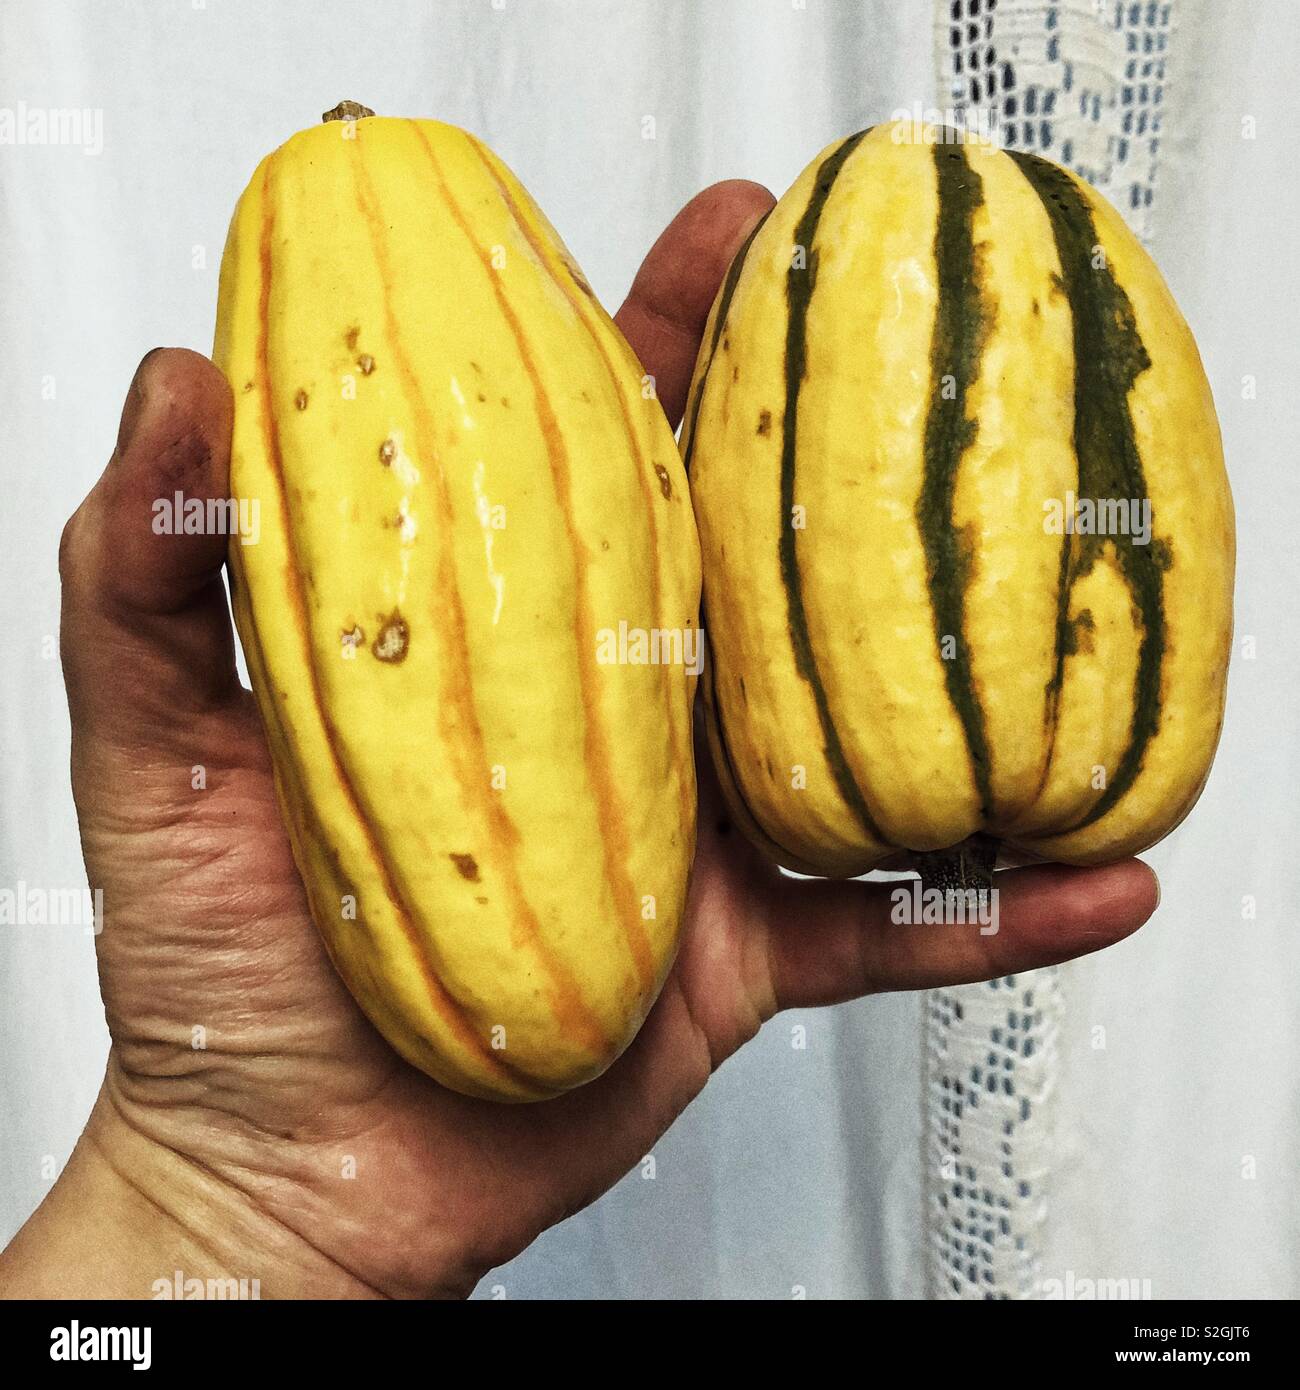 Two small delicata squashes fit in a hand Stock Photo